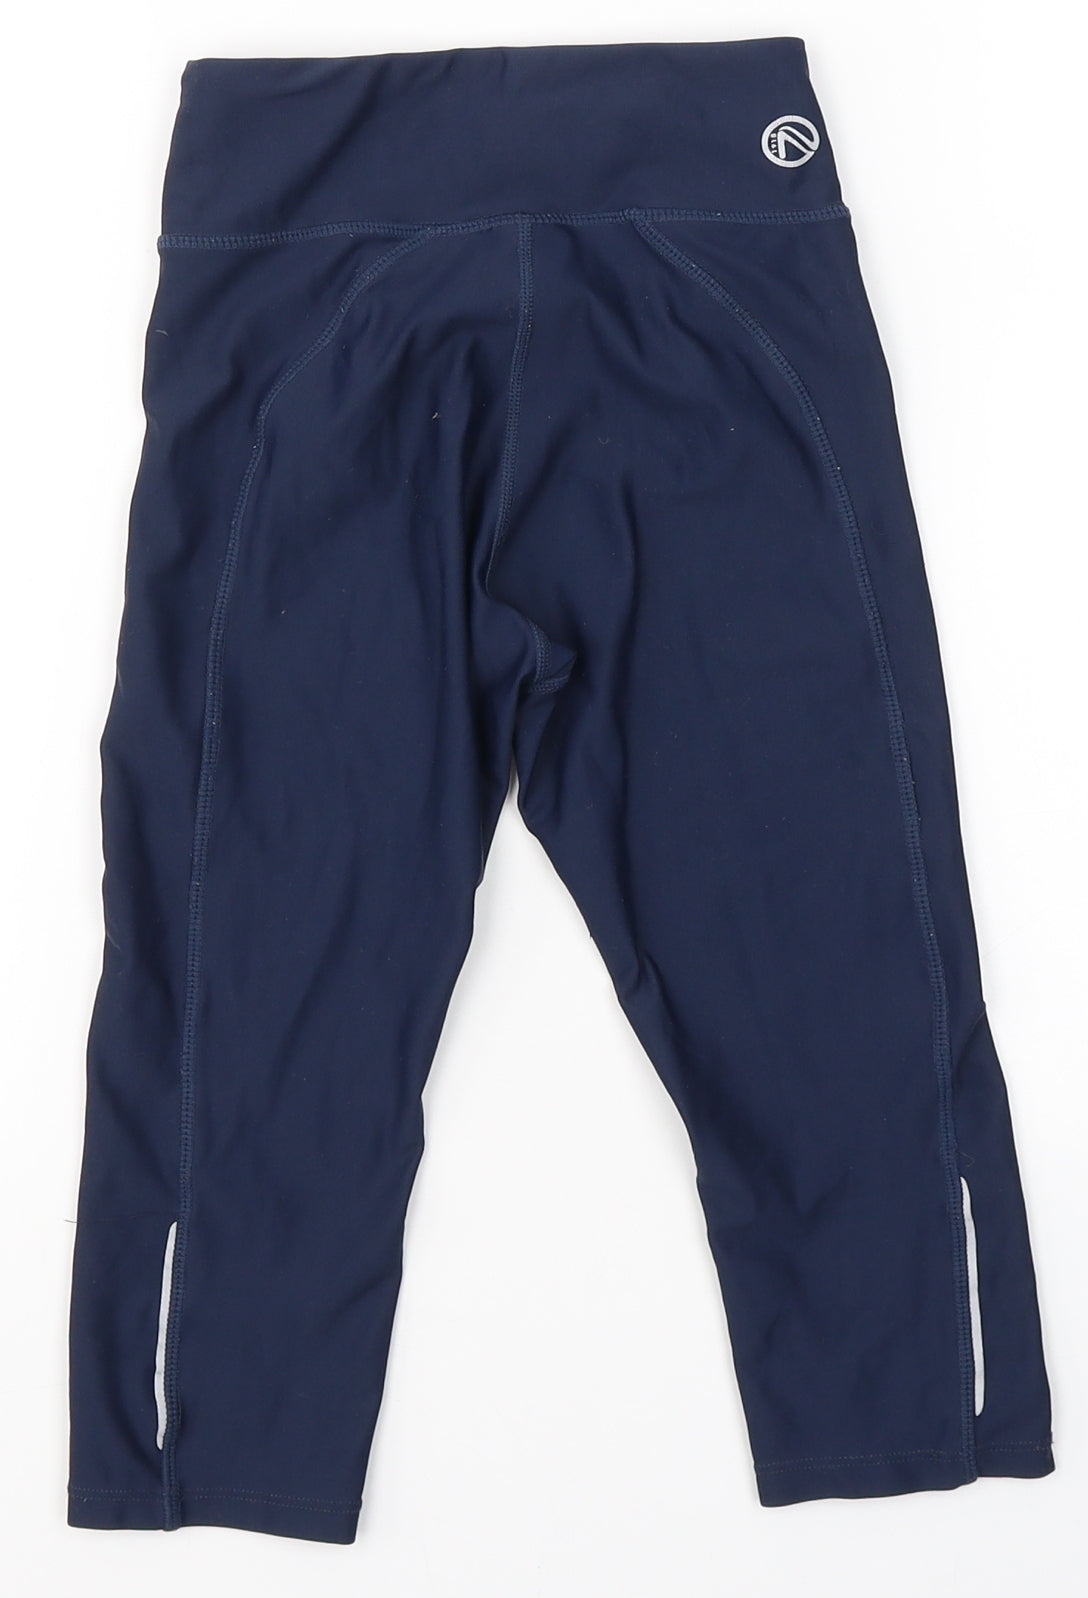 O'Neill Girls Blue  Polyester Jegging Trousers Size 9-10 Years  Regular